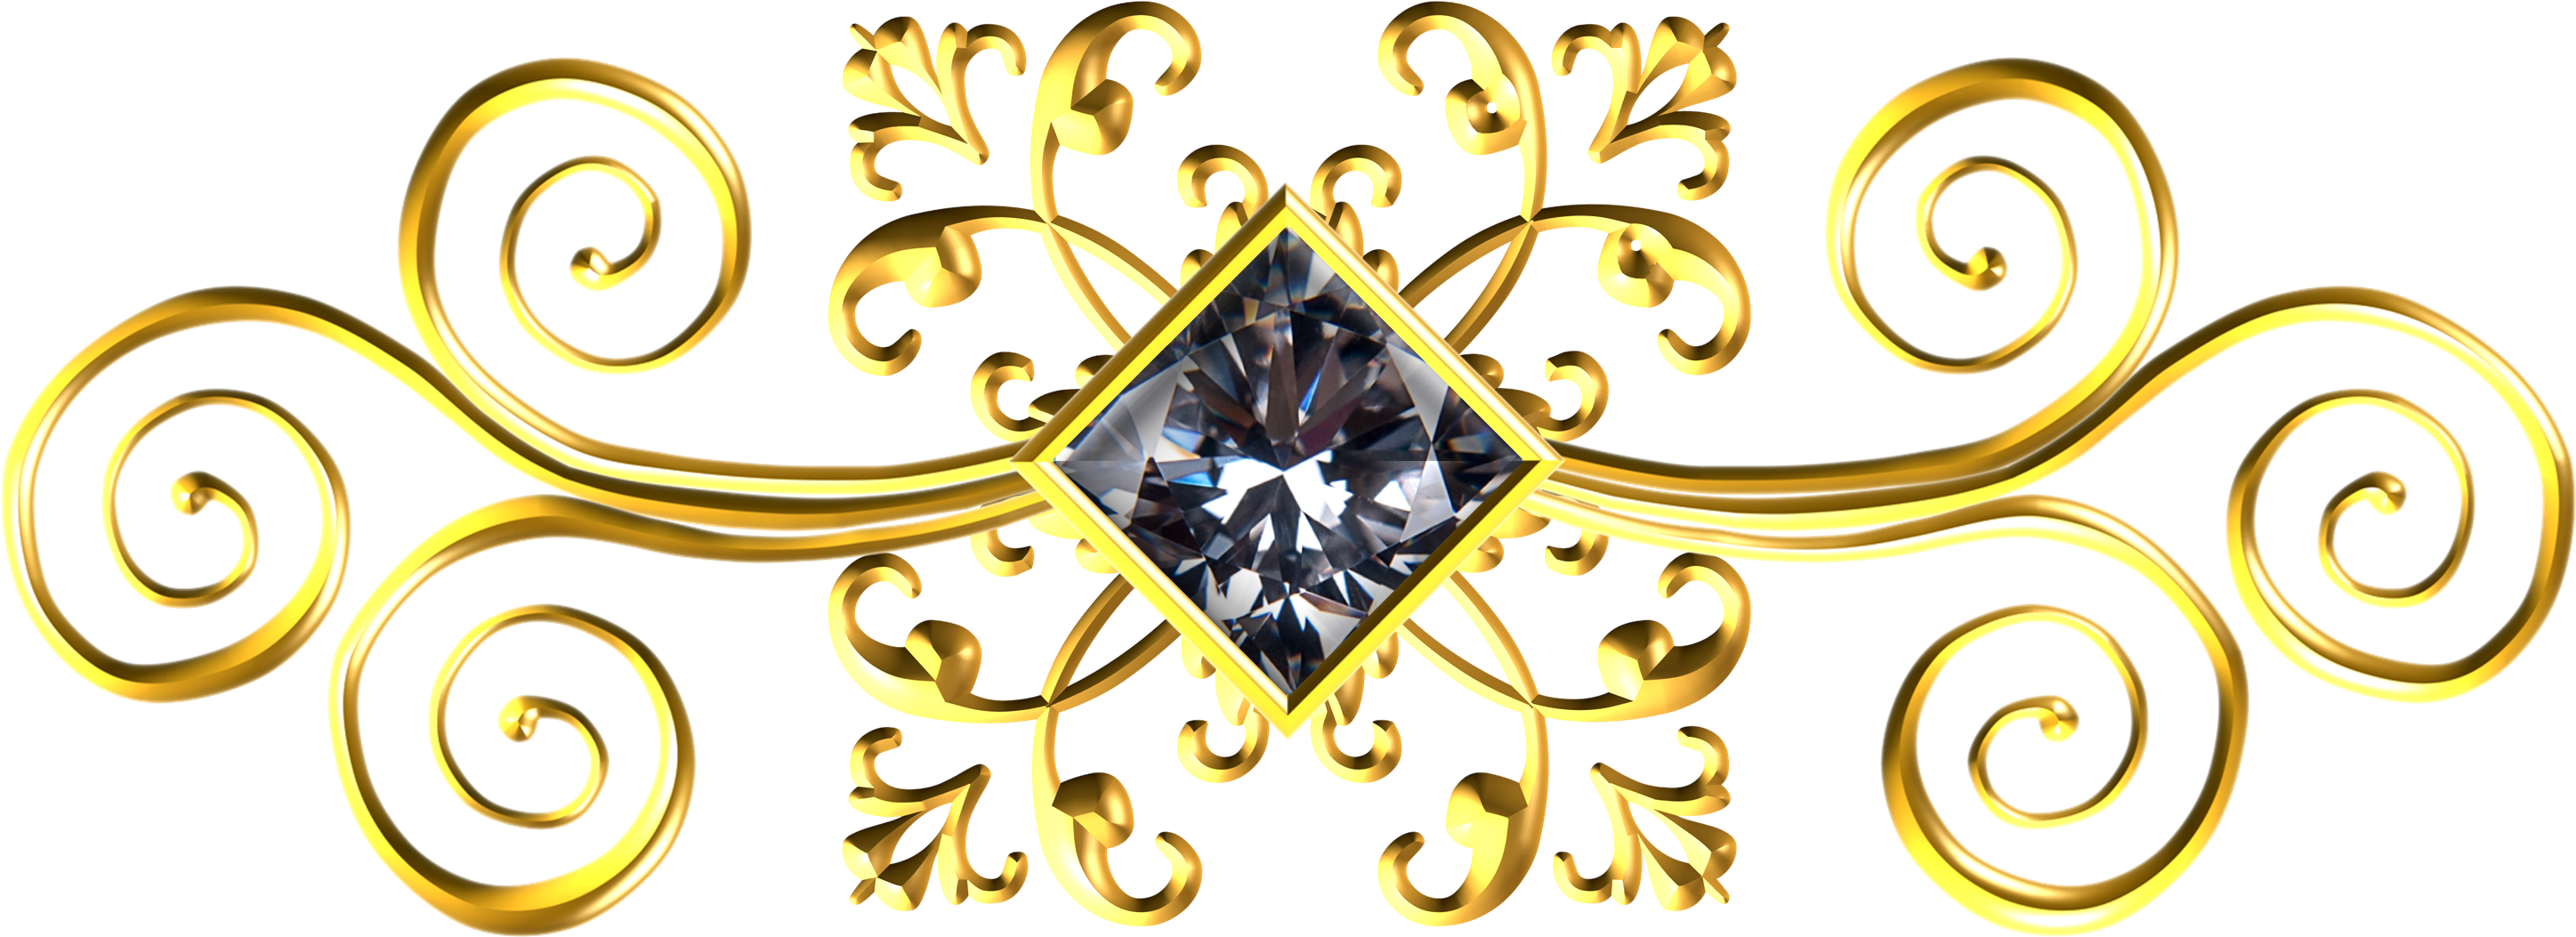 Golden_ Scrollwork_with_ Diamond_ Centerpiece.png